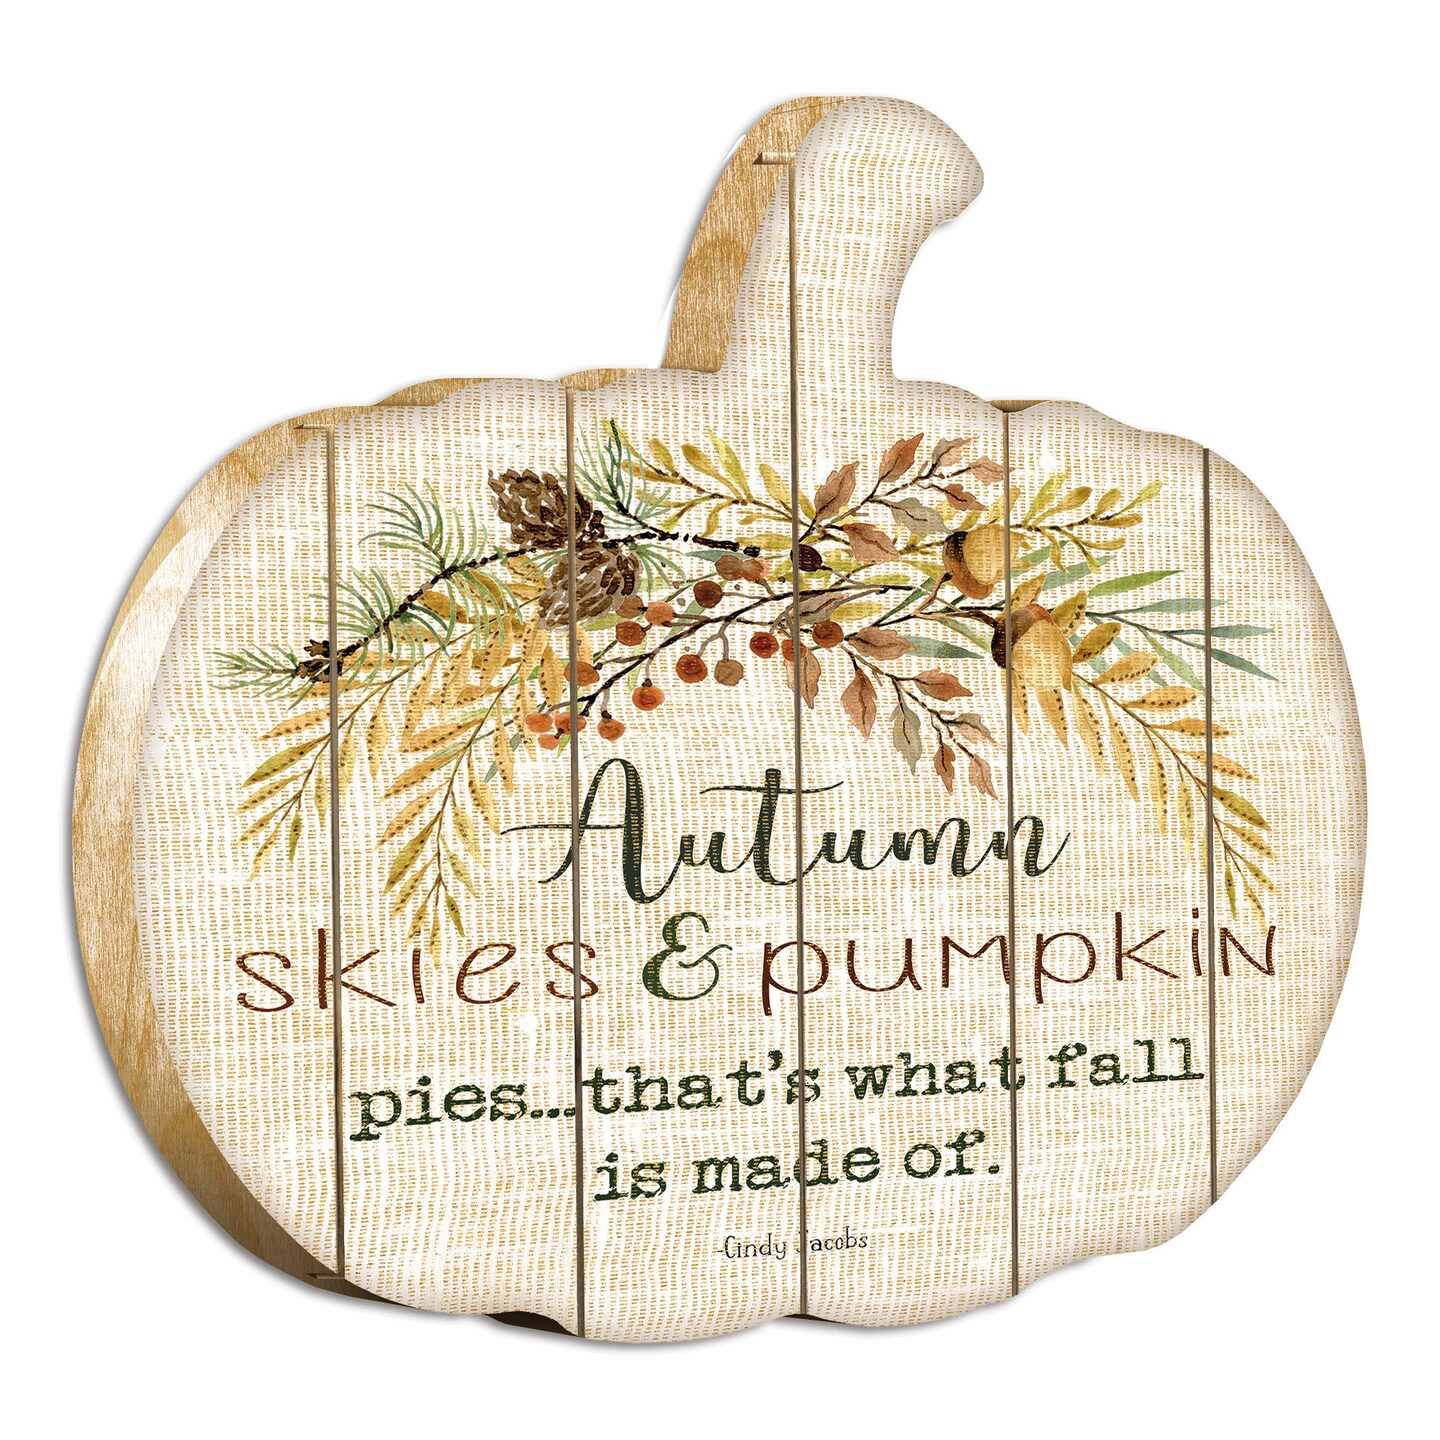 Autumn Skies - By Artisan Cindy Jacobs Printed on Wooden Pumpkin Wall Art